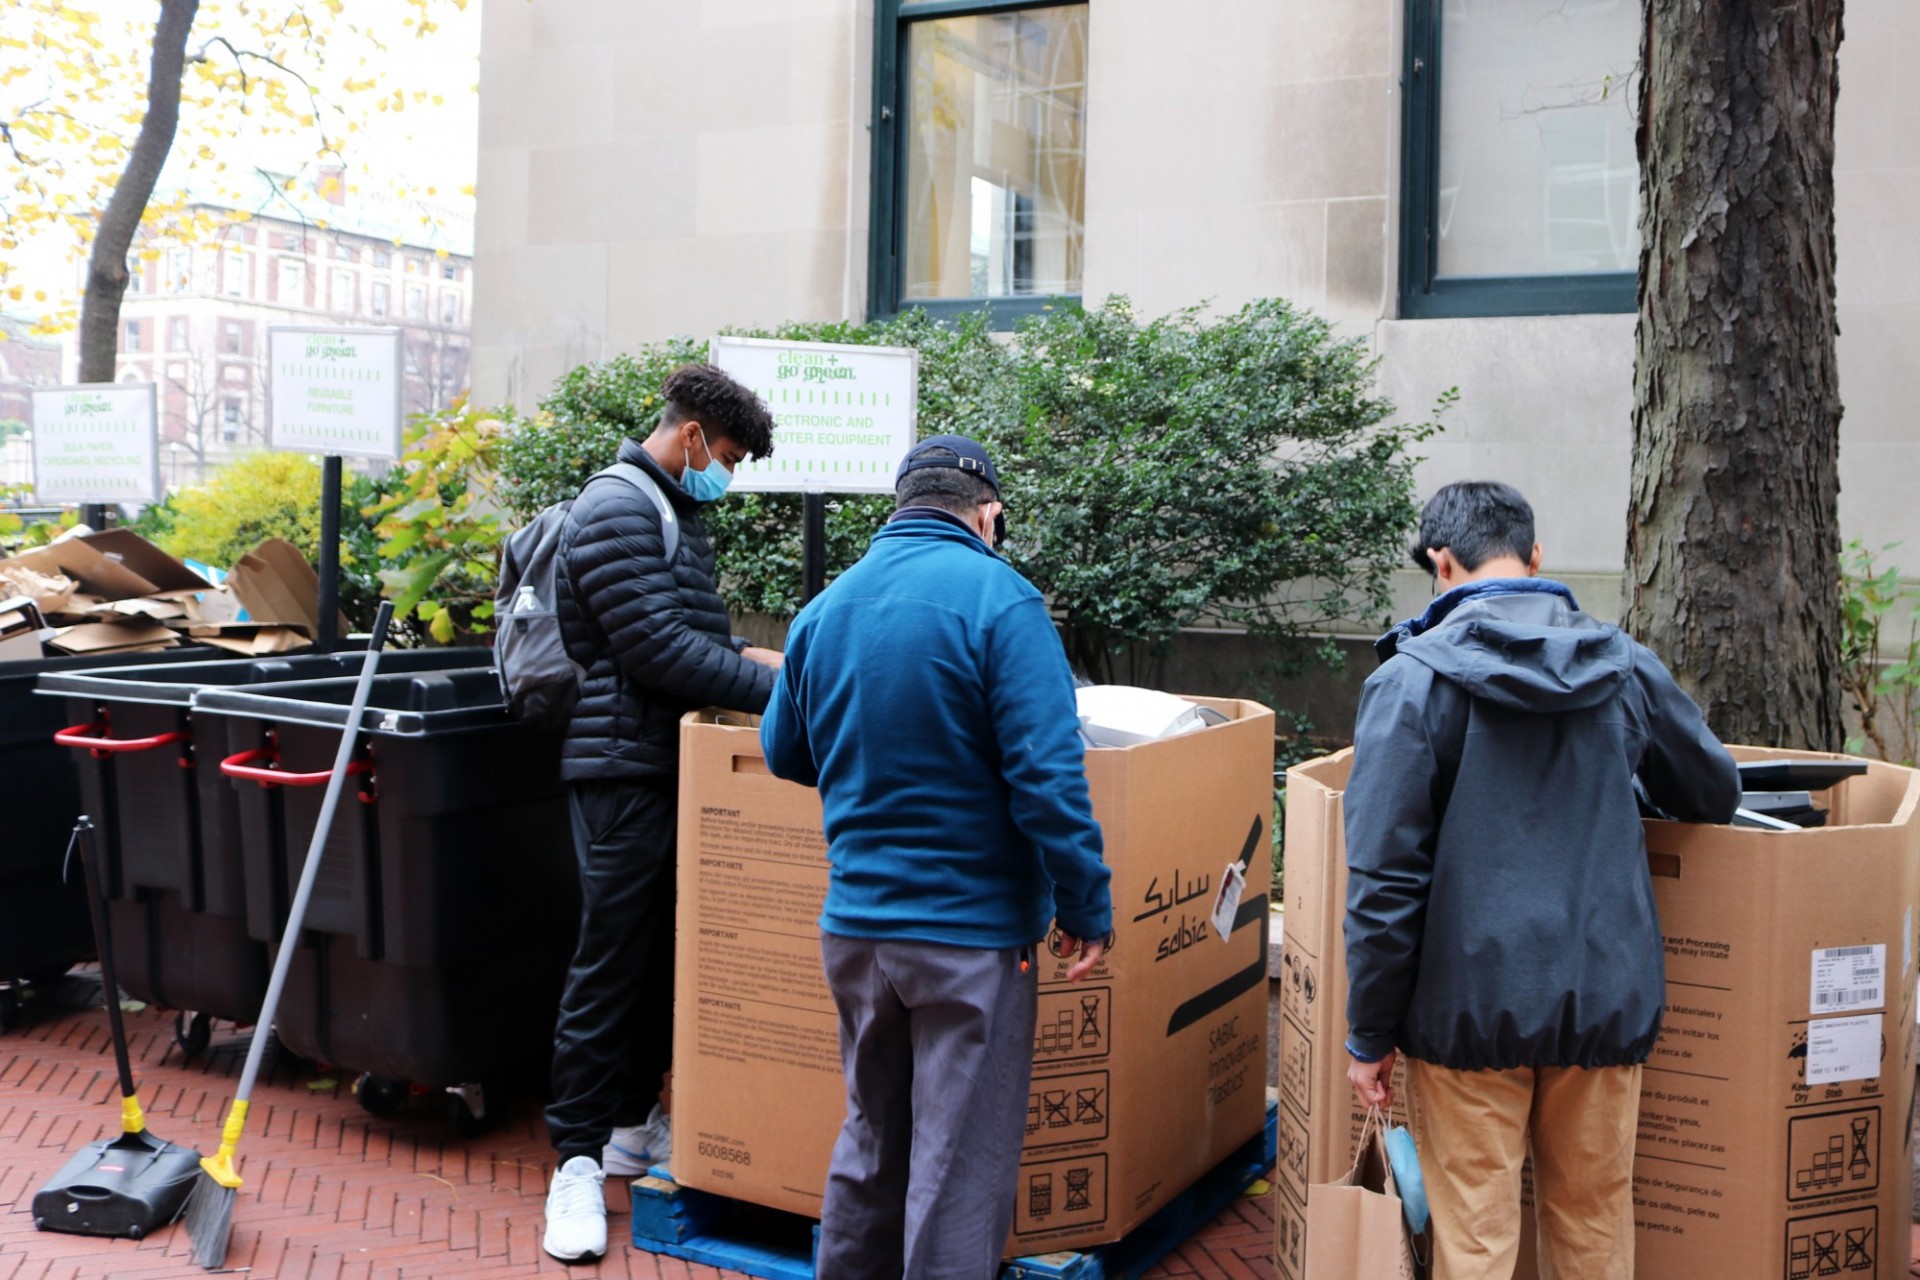 Students check Clean + Go Green bins full of electronics that are next to Butler Library.